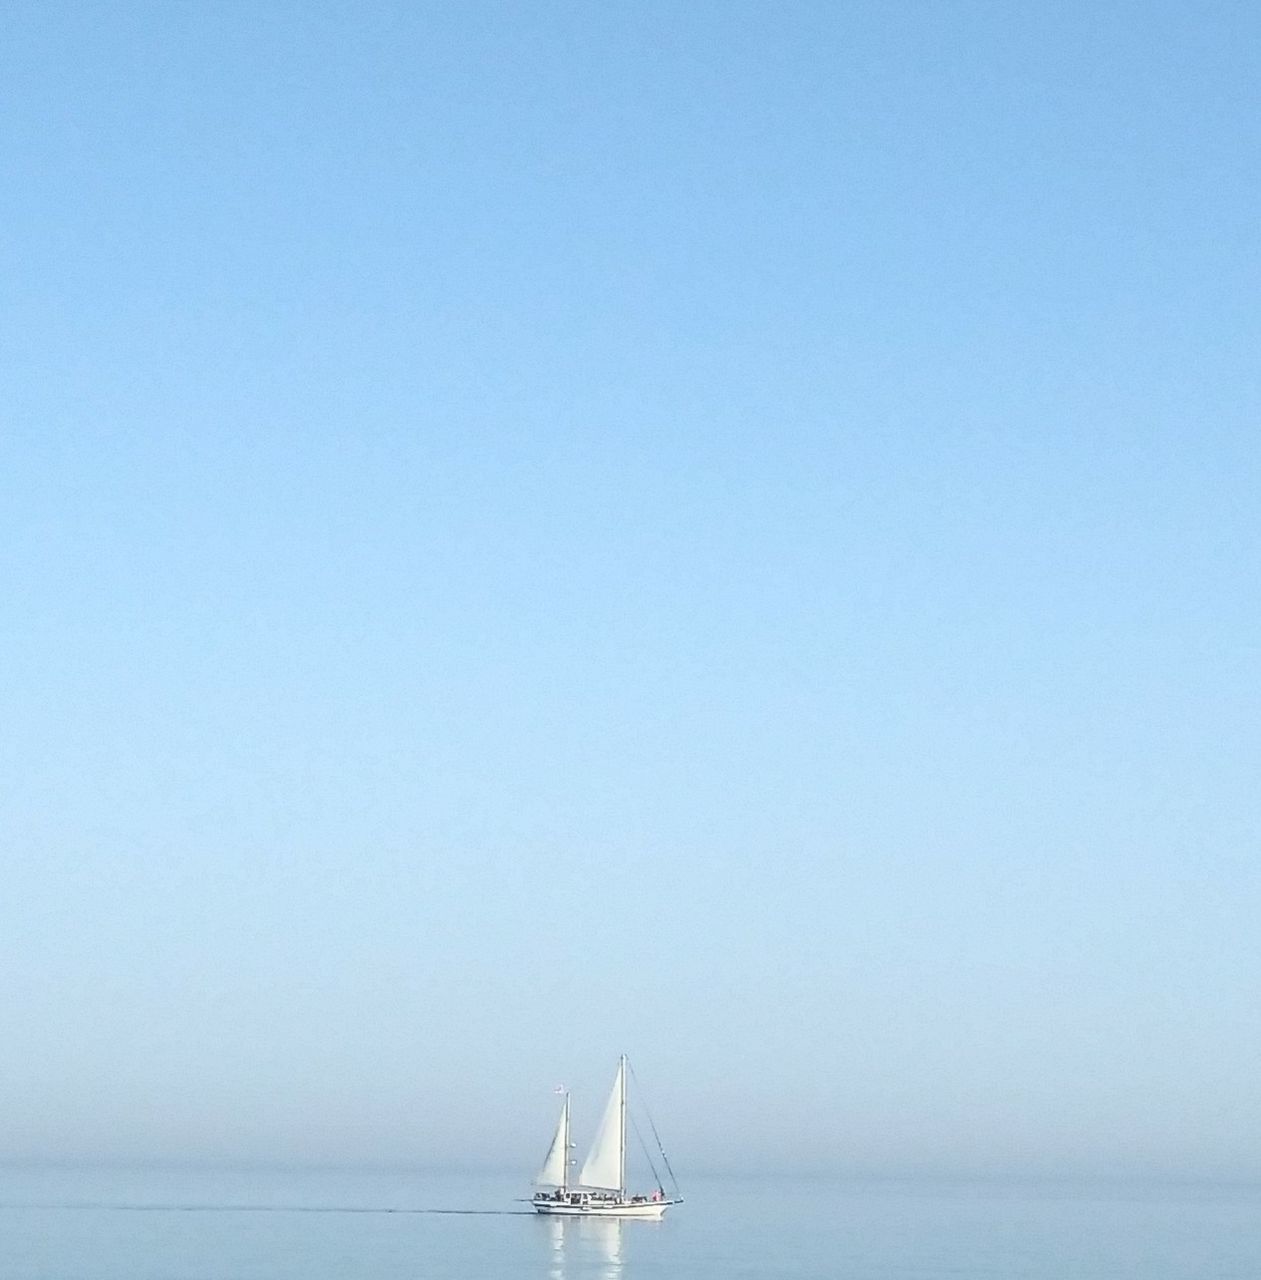 water, sea, sky, nautical vessel, copy space, transportation, mode of transportation, horizon over water, blue, clear sky, scenics - nature, sailboat, horizon, waterfront, beauty in nature, nature, sailing, no people, day, outdoors, yacht